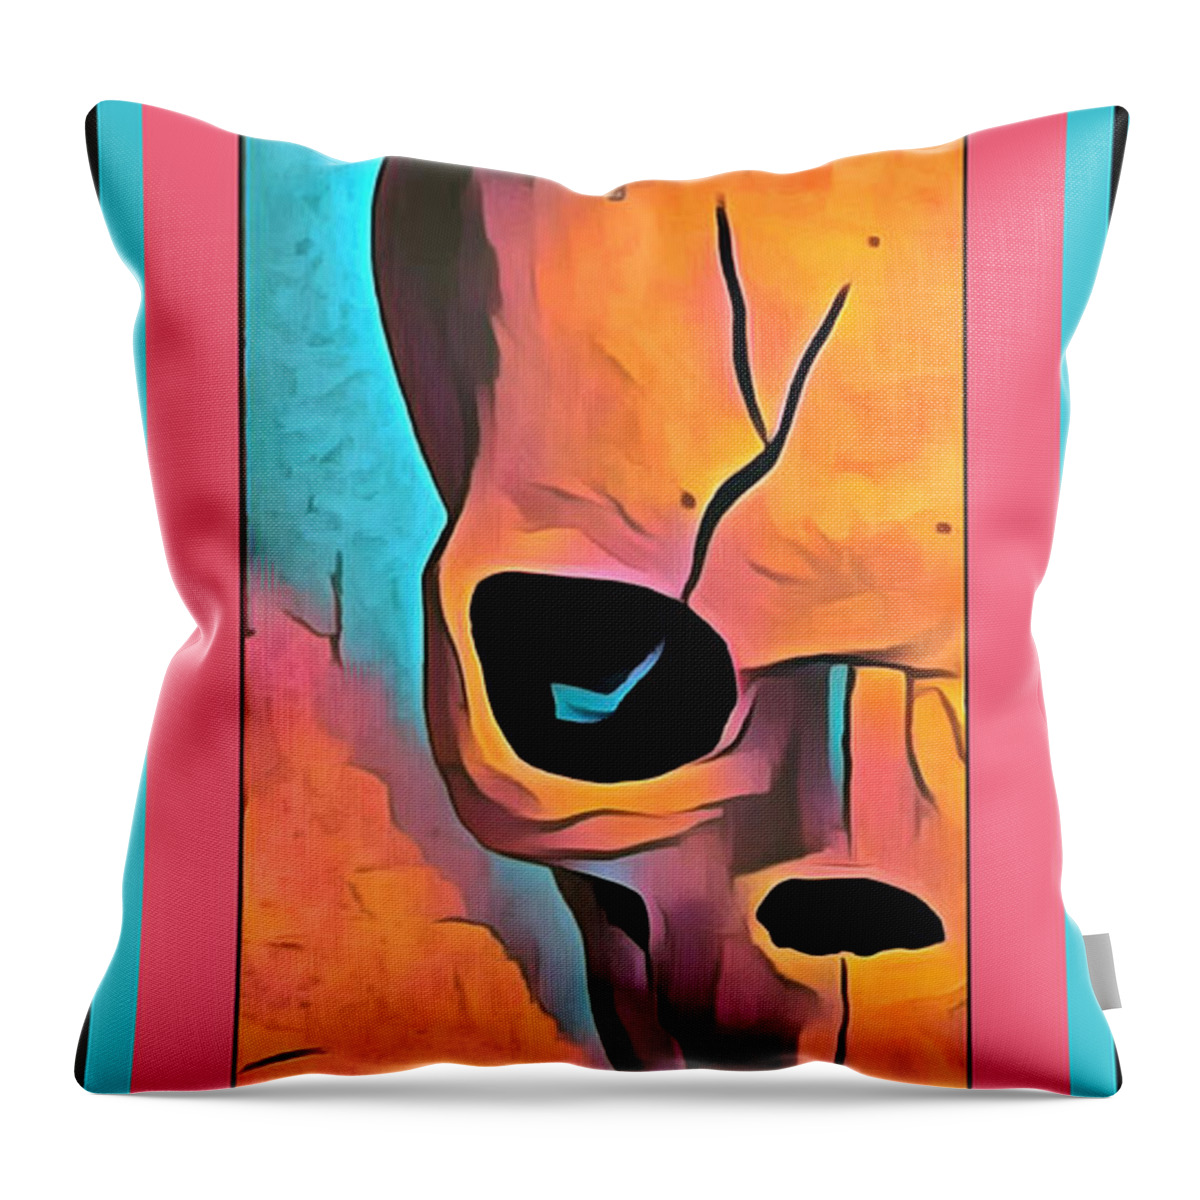 Skull Throw Pillow featuring the digital art The Eye of Death Abstract Skull by Floyd Snyder